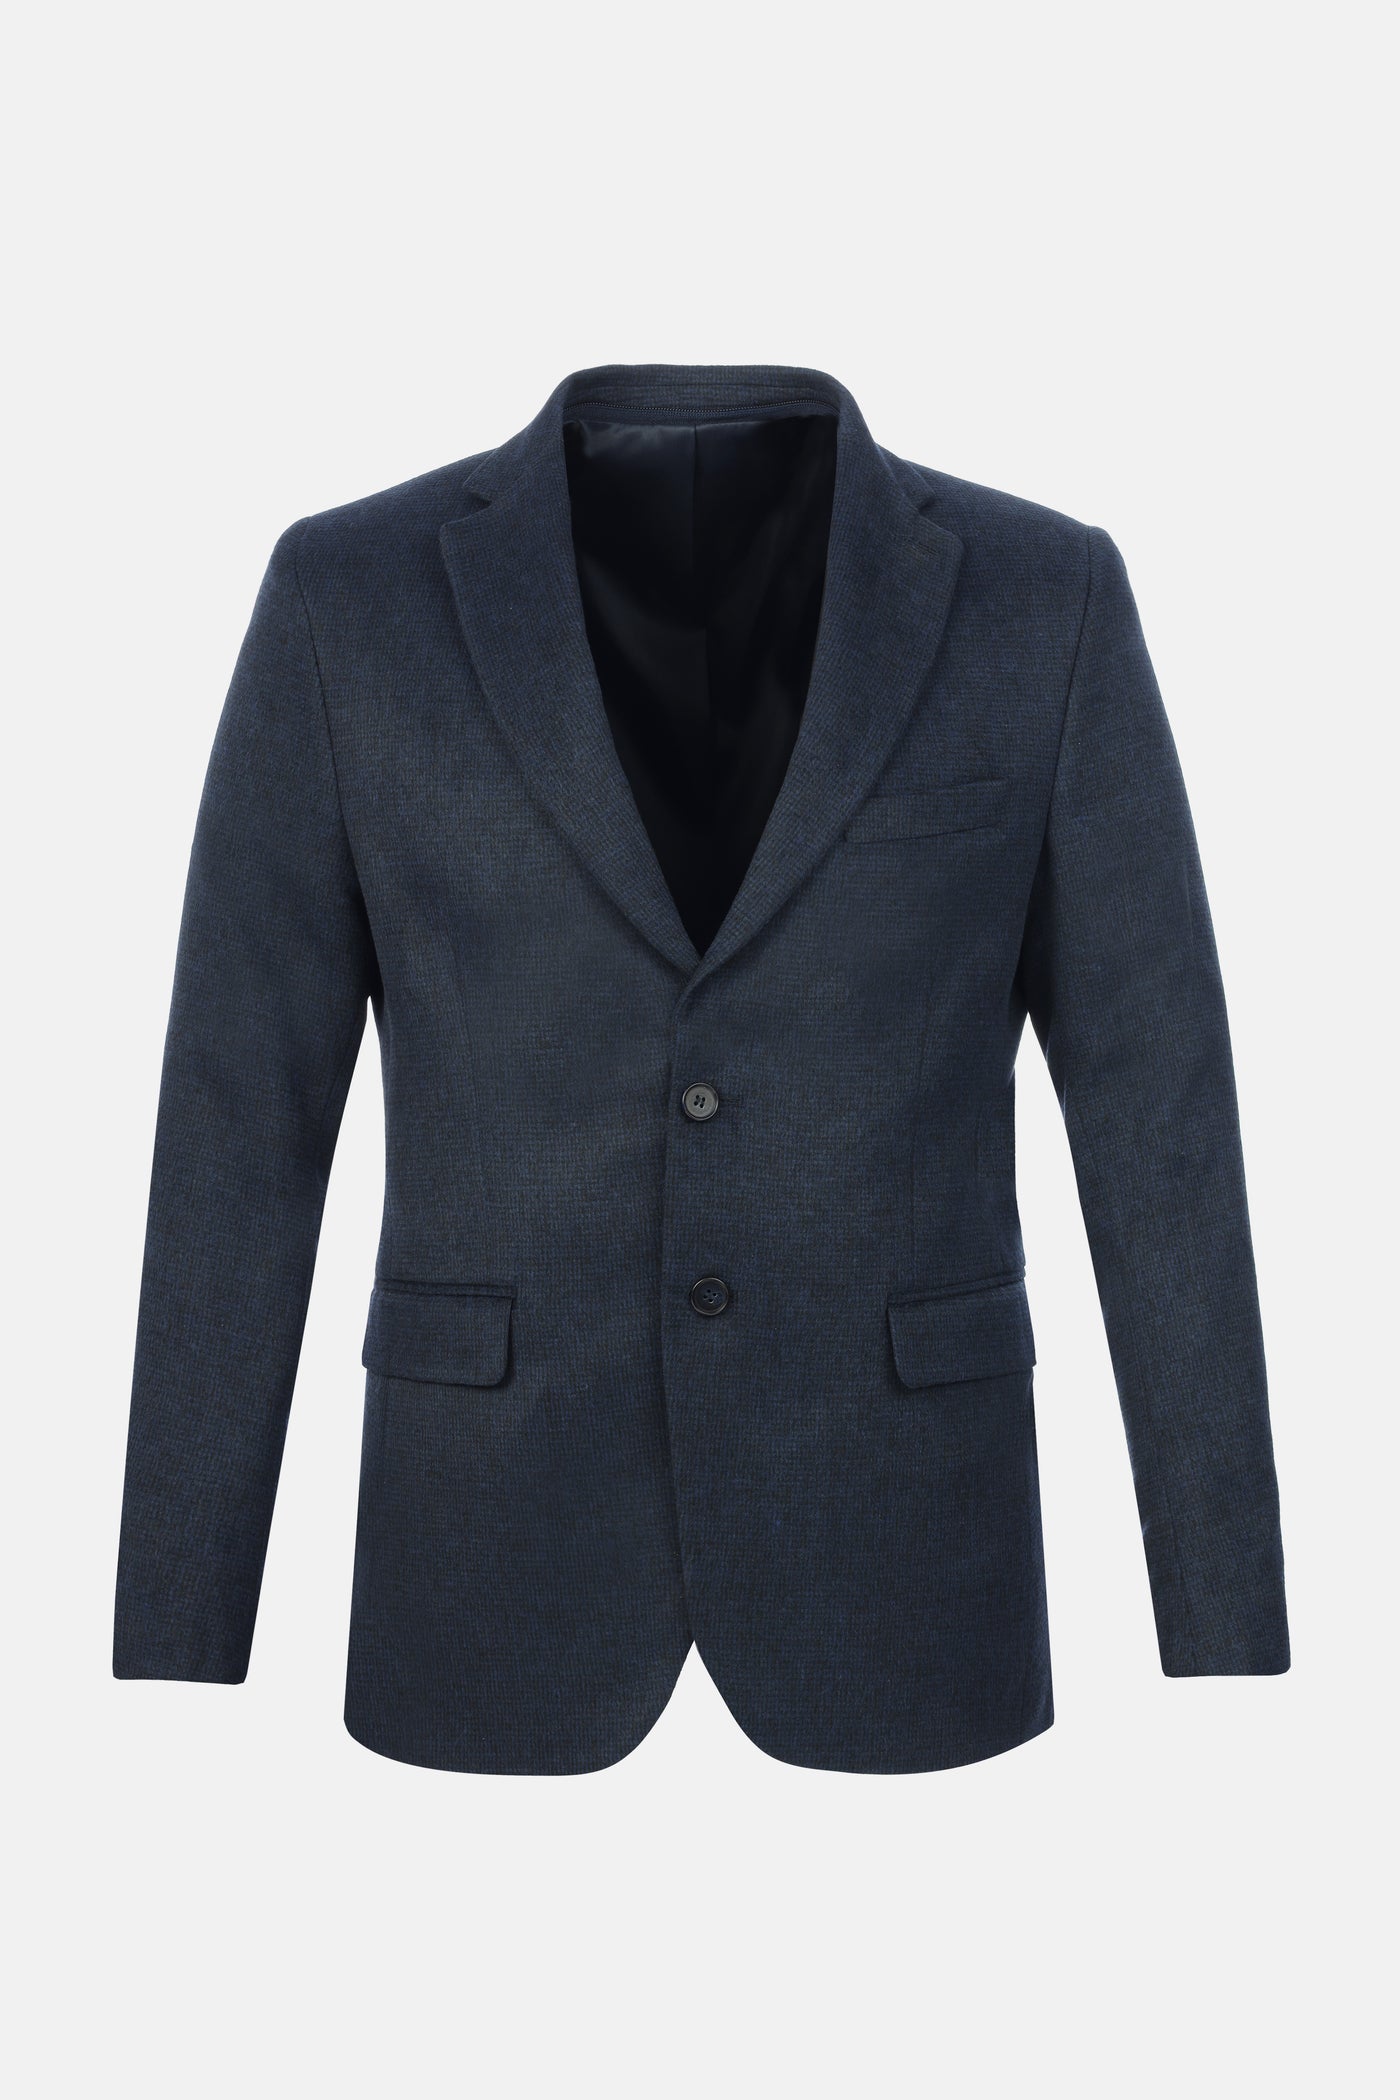 Woven Drak Navy & Black Blazer with removable padded piece